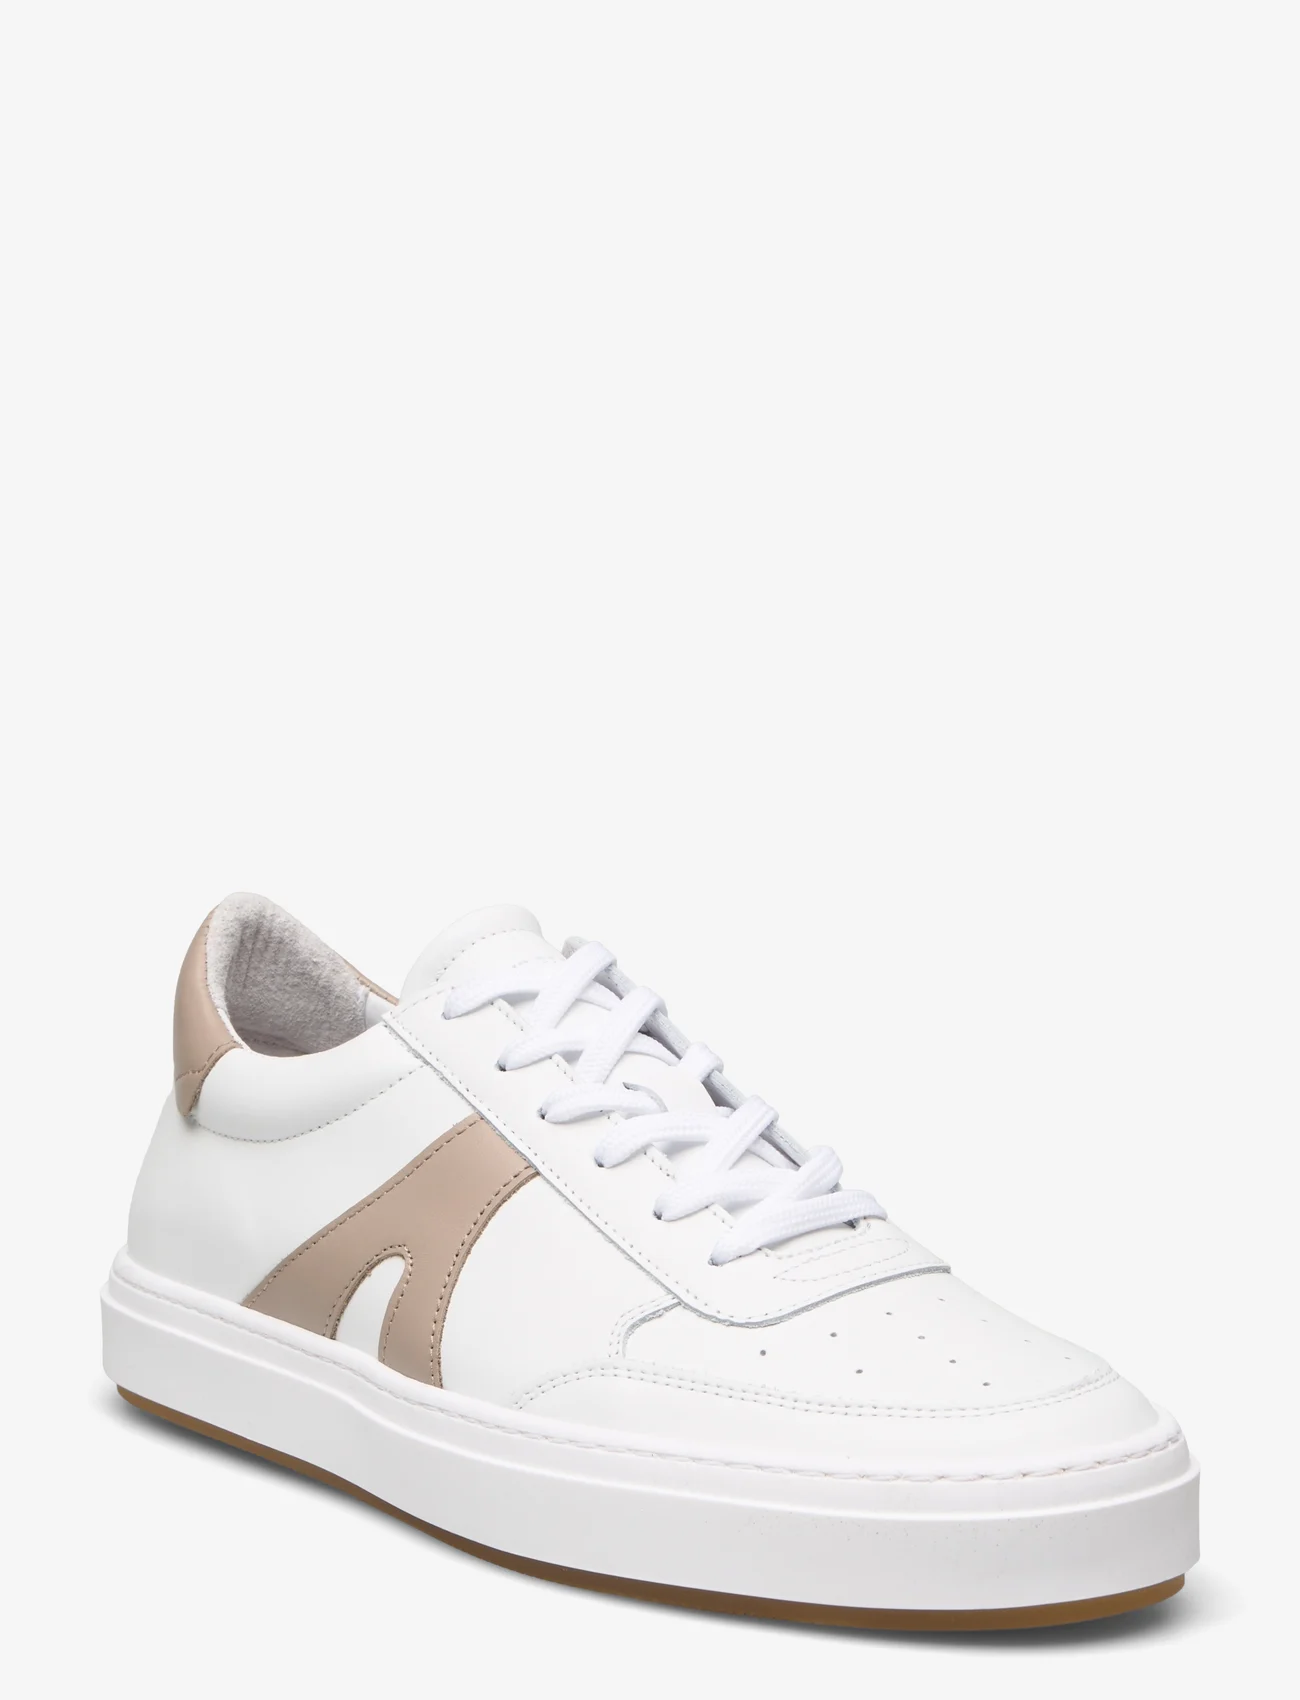 Garment Project - Legend - White/Earth Leather - low tops - white - 0